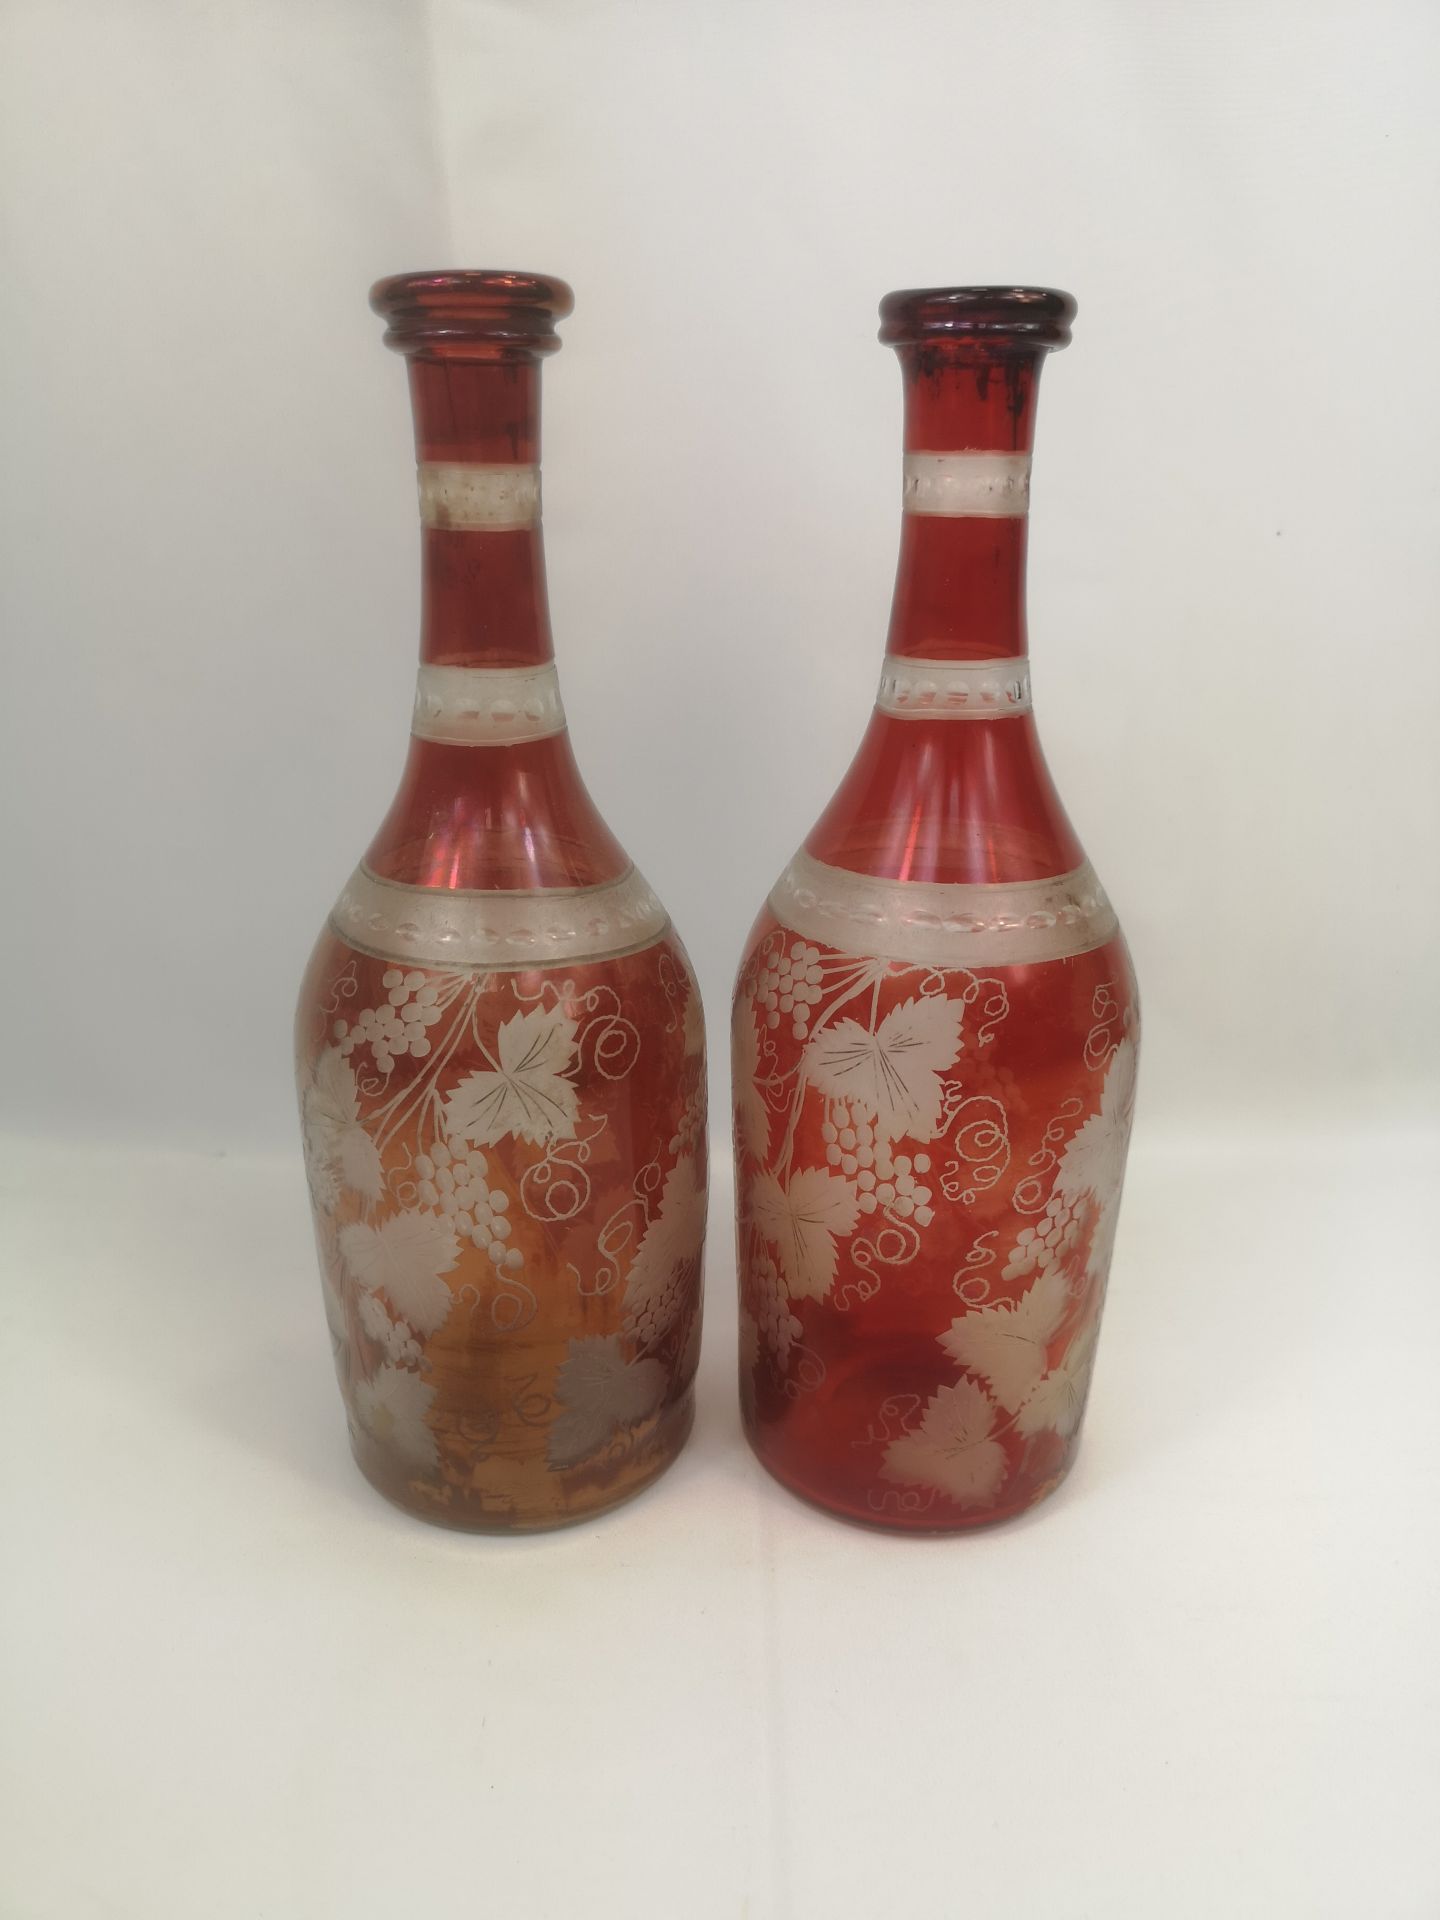 Two Bohemian red glass decanters - Image 6 of 6